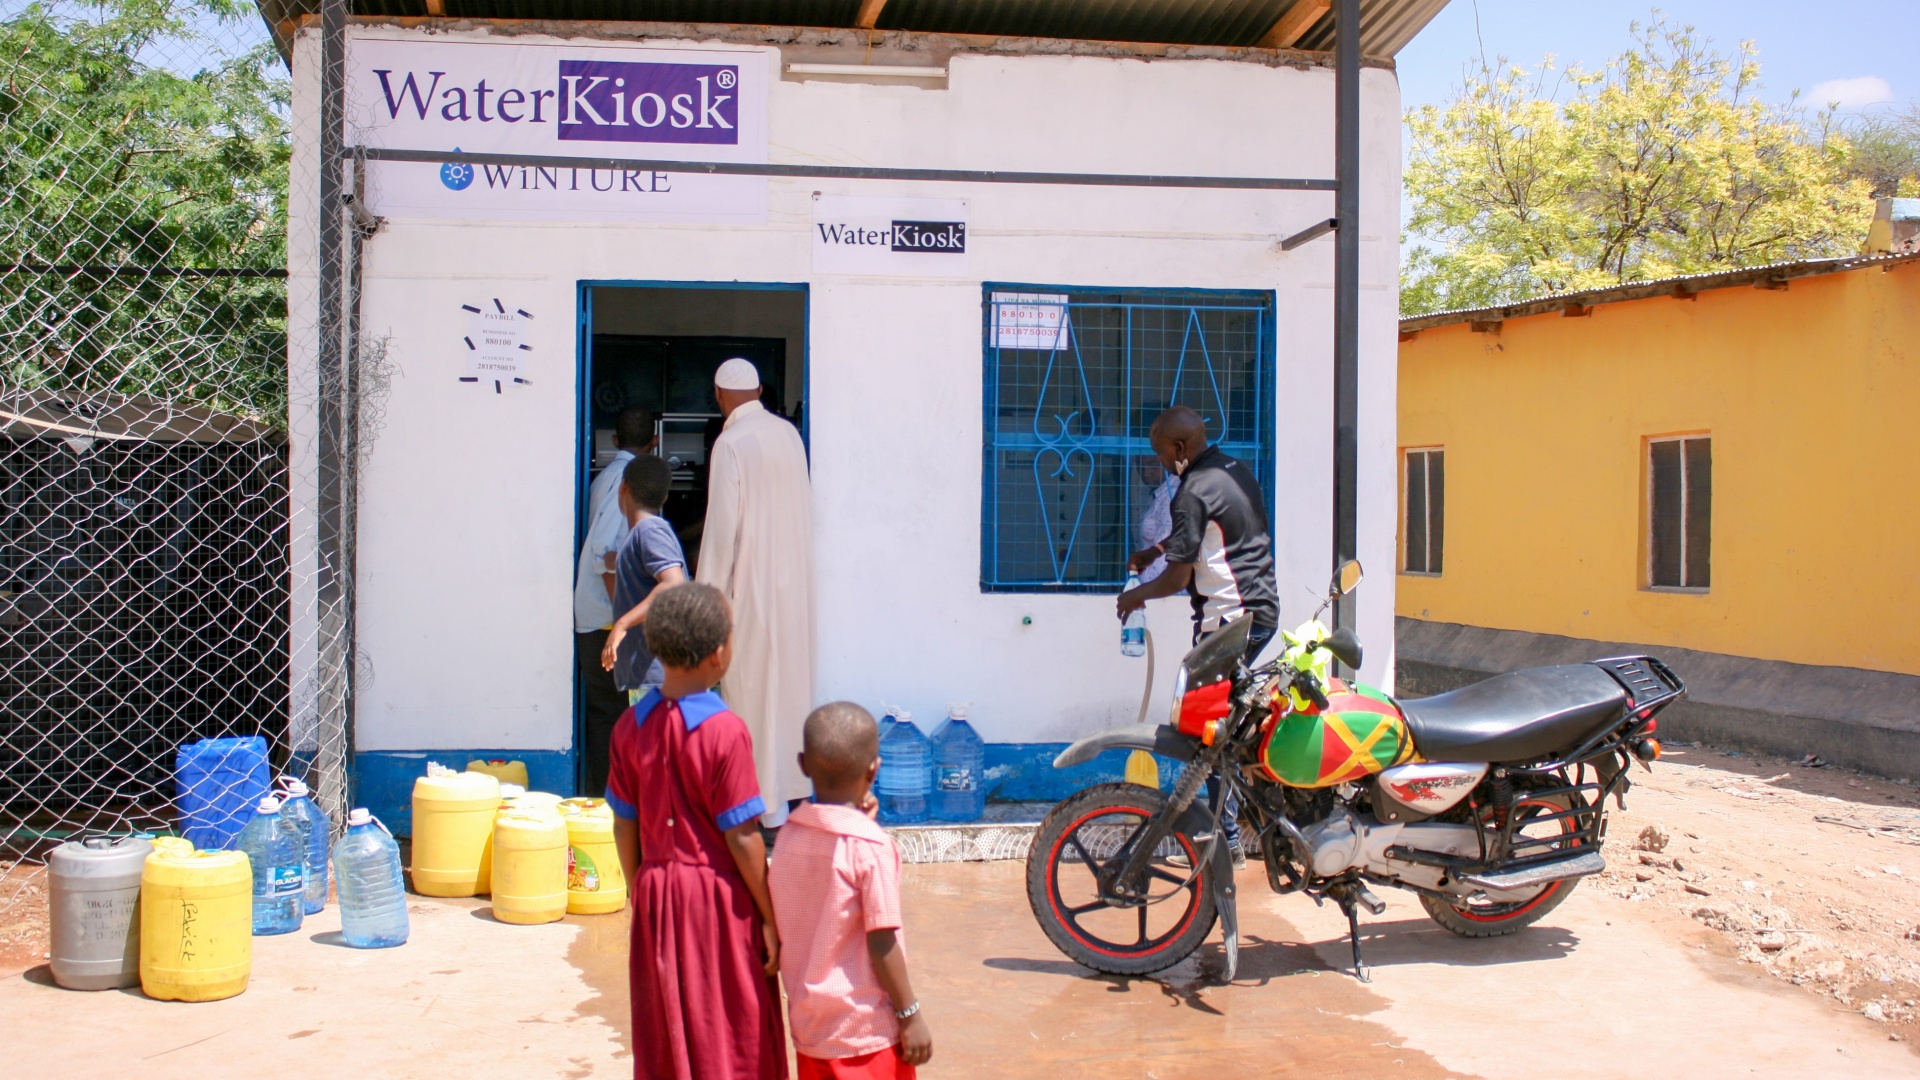 A young Kenyan fills up a bottle of drinking water at a WaterKiosk. His motorcycle is parked in front of the WaterKiosk and two small children are watching.